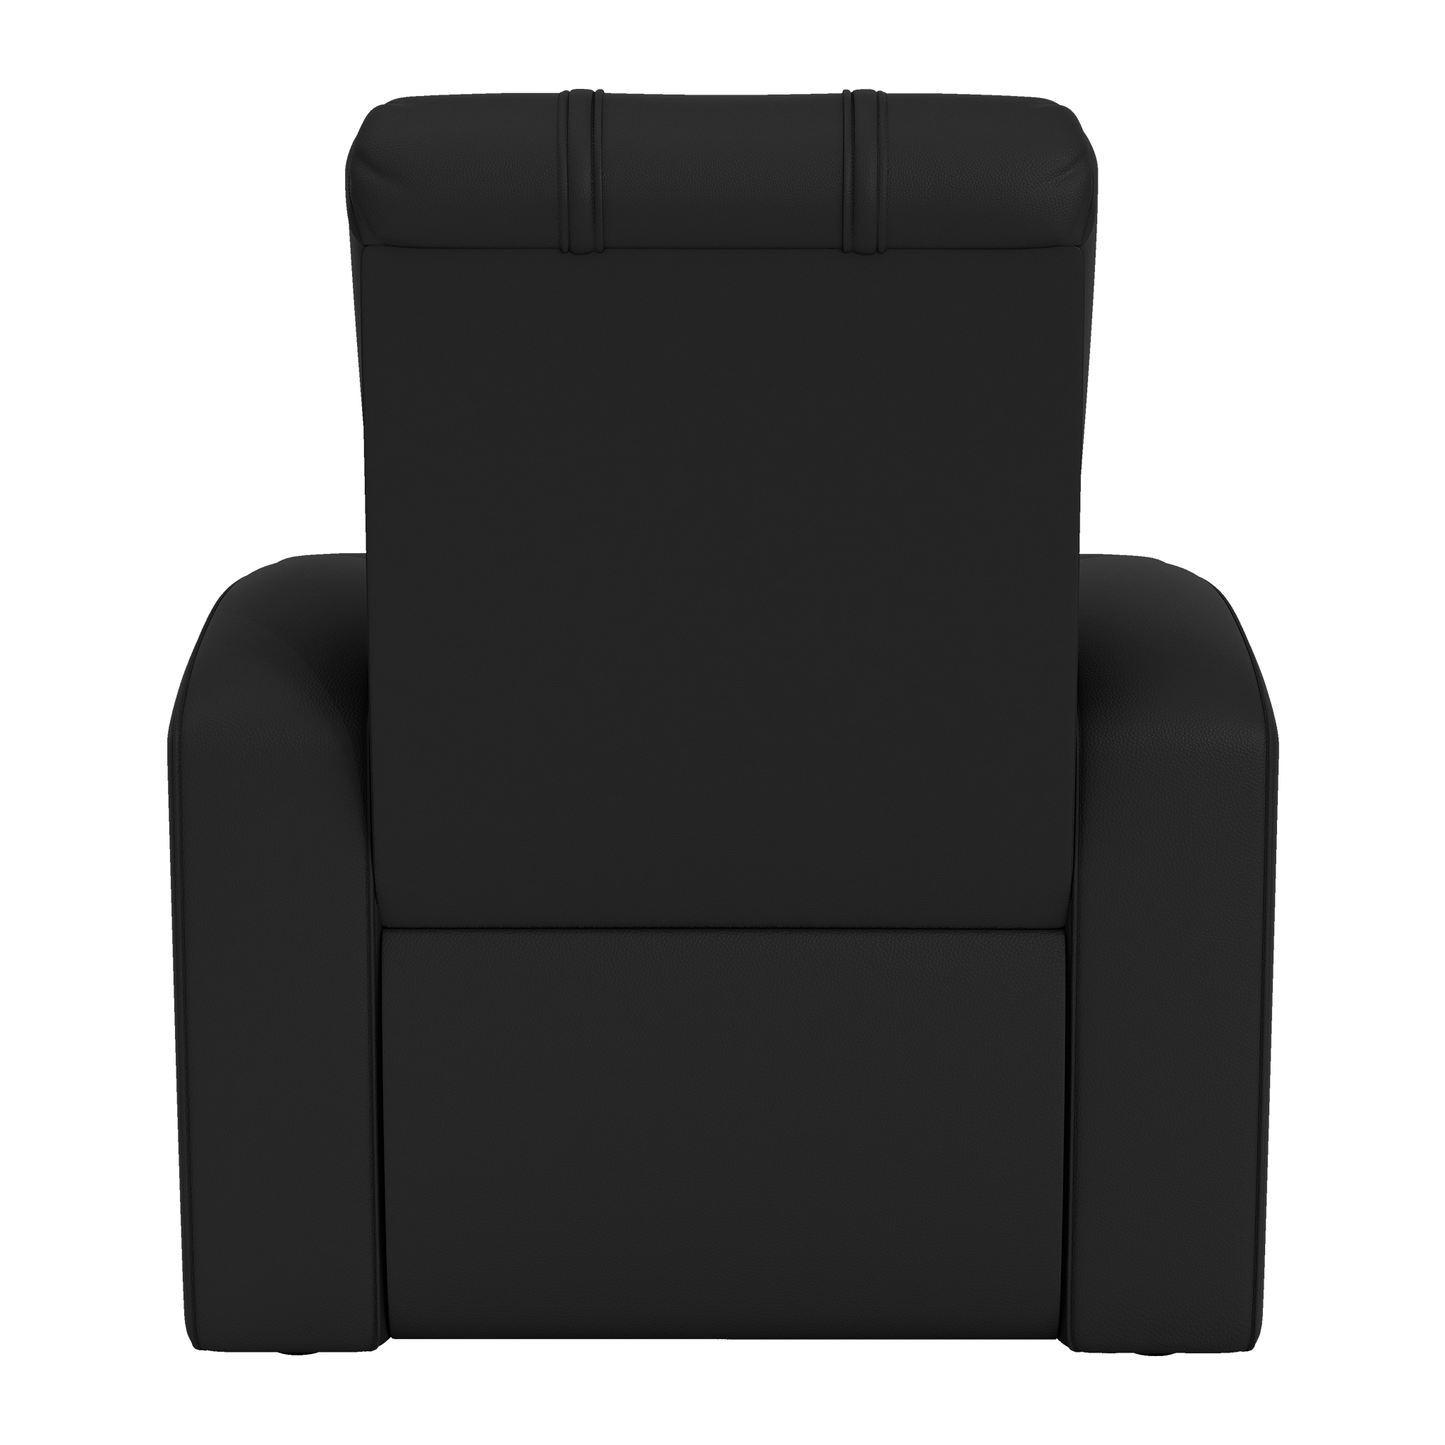 Relax Home Theater Recliner with Boston Celtics Logo